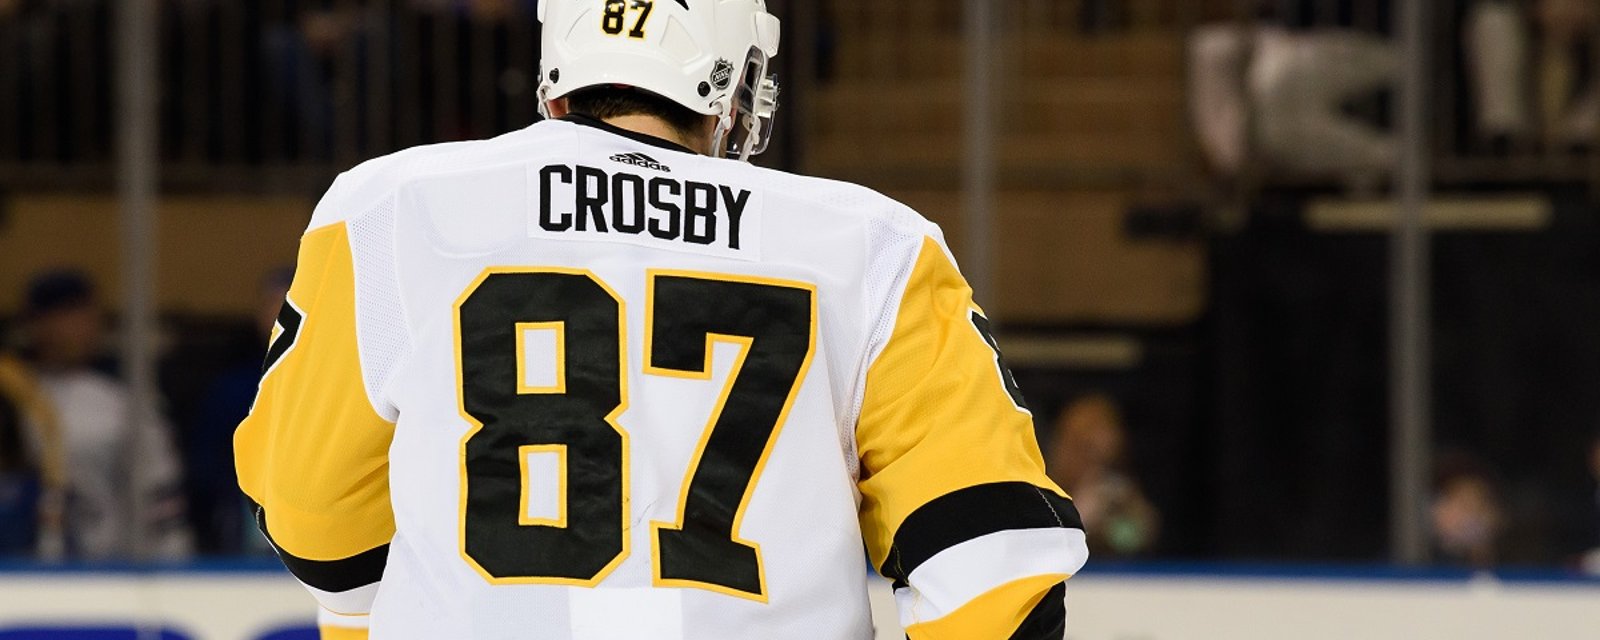 Rumor: Two familiar faces top the Penguins list of GM candidates.